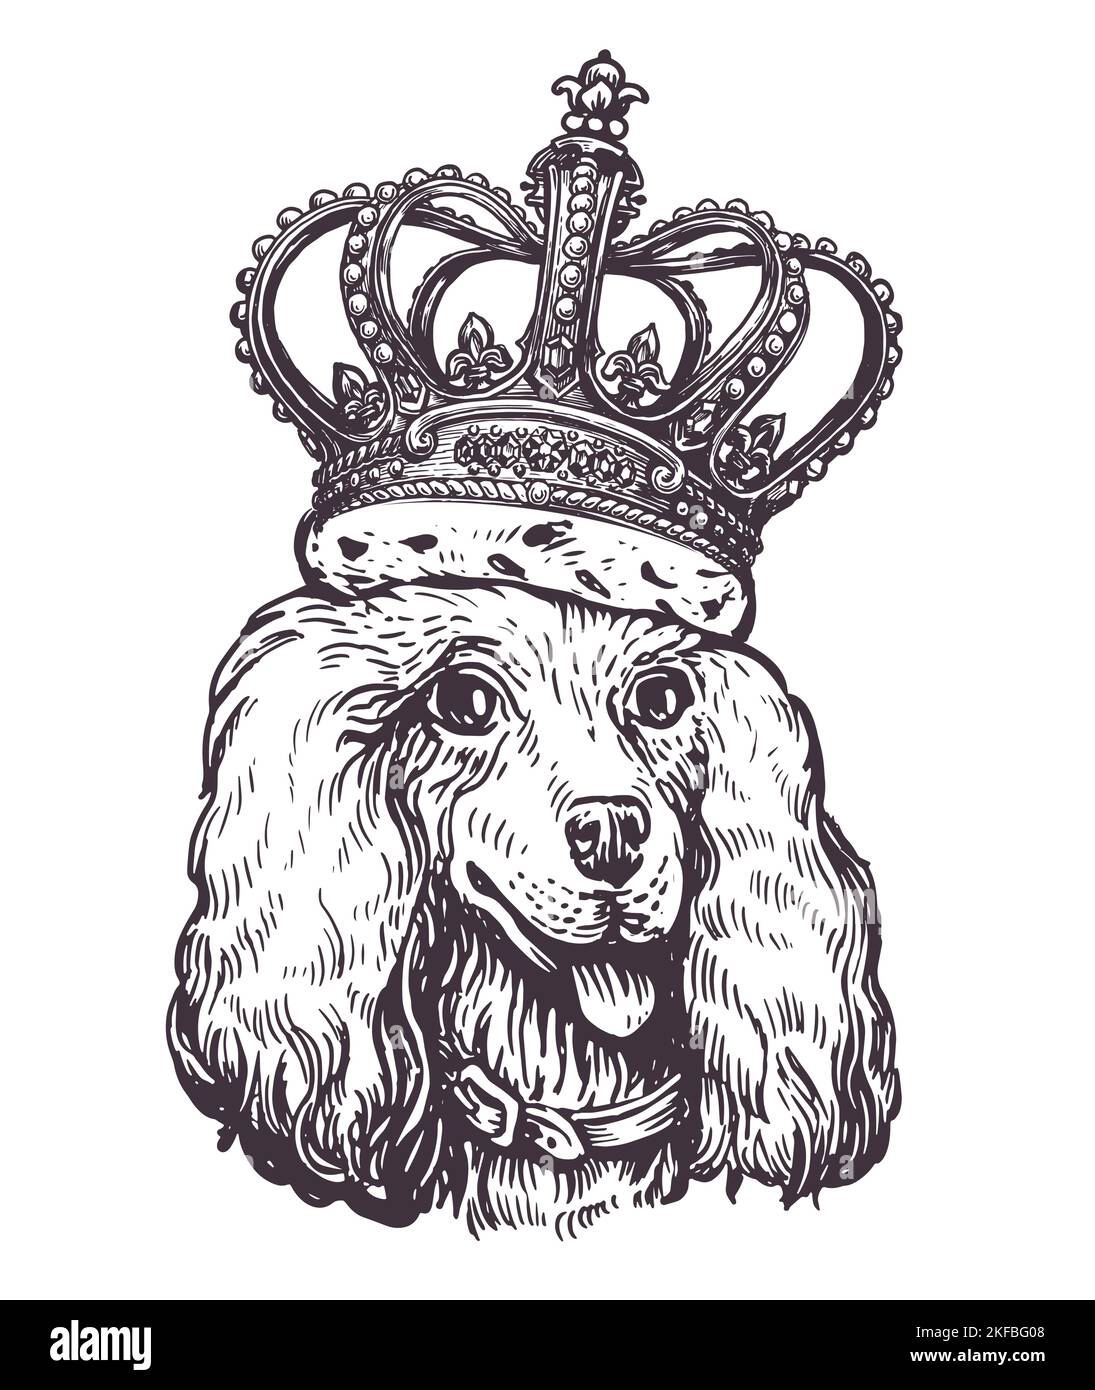 Portrait of cute Dog poodle with crown on his head. Pet animal, puppy head sketch. Vintage vector illustration Stock Vector